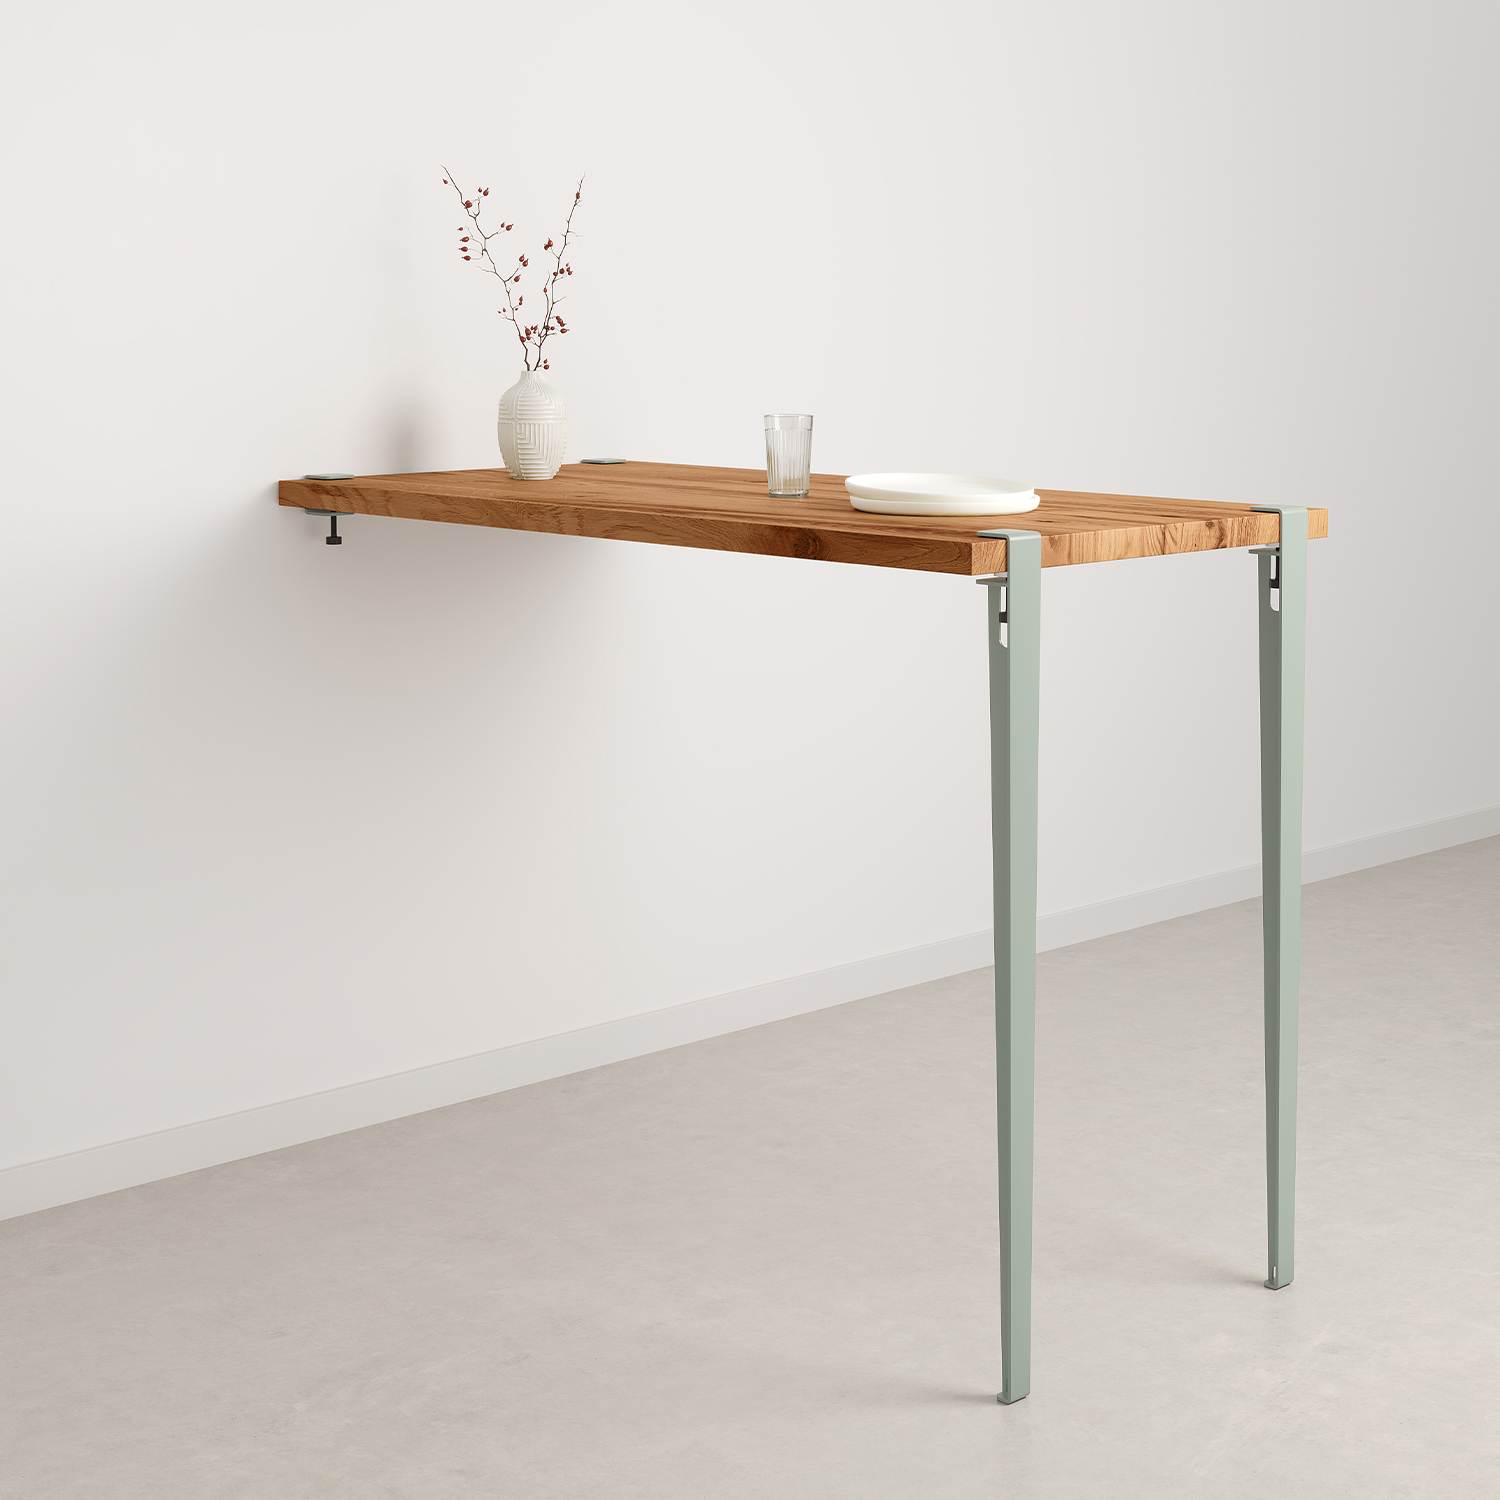 Wall–mounted high table – height 90 or 110cm - reclaimed wood